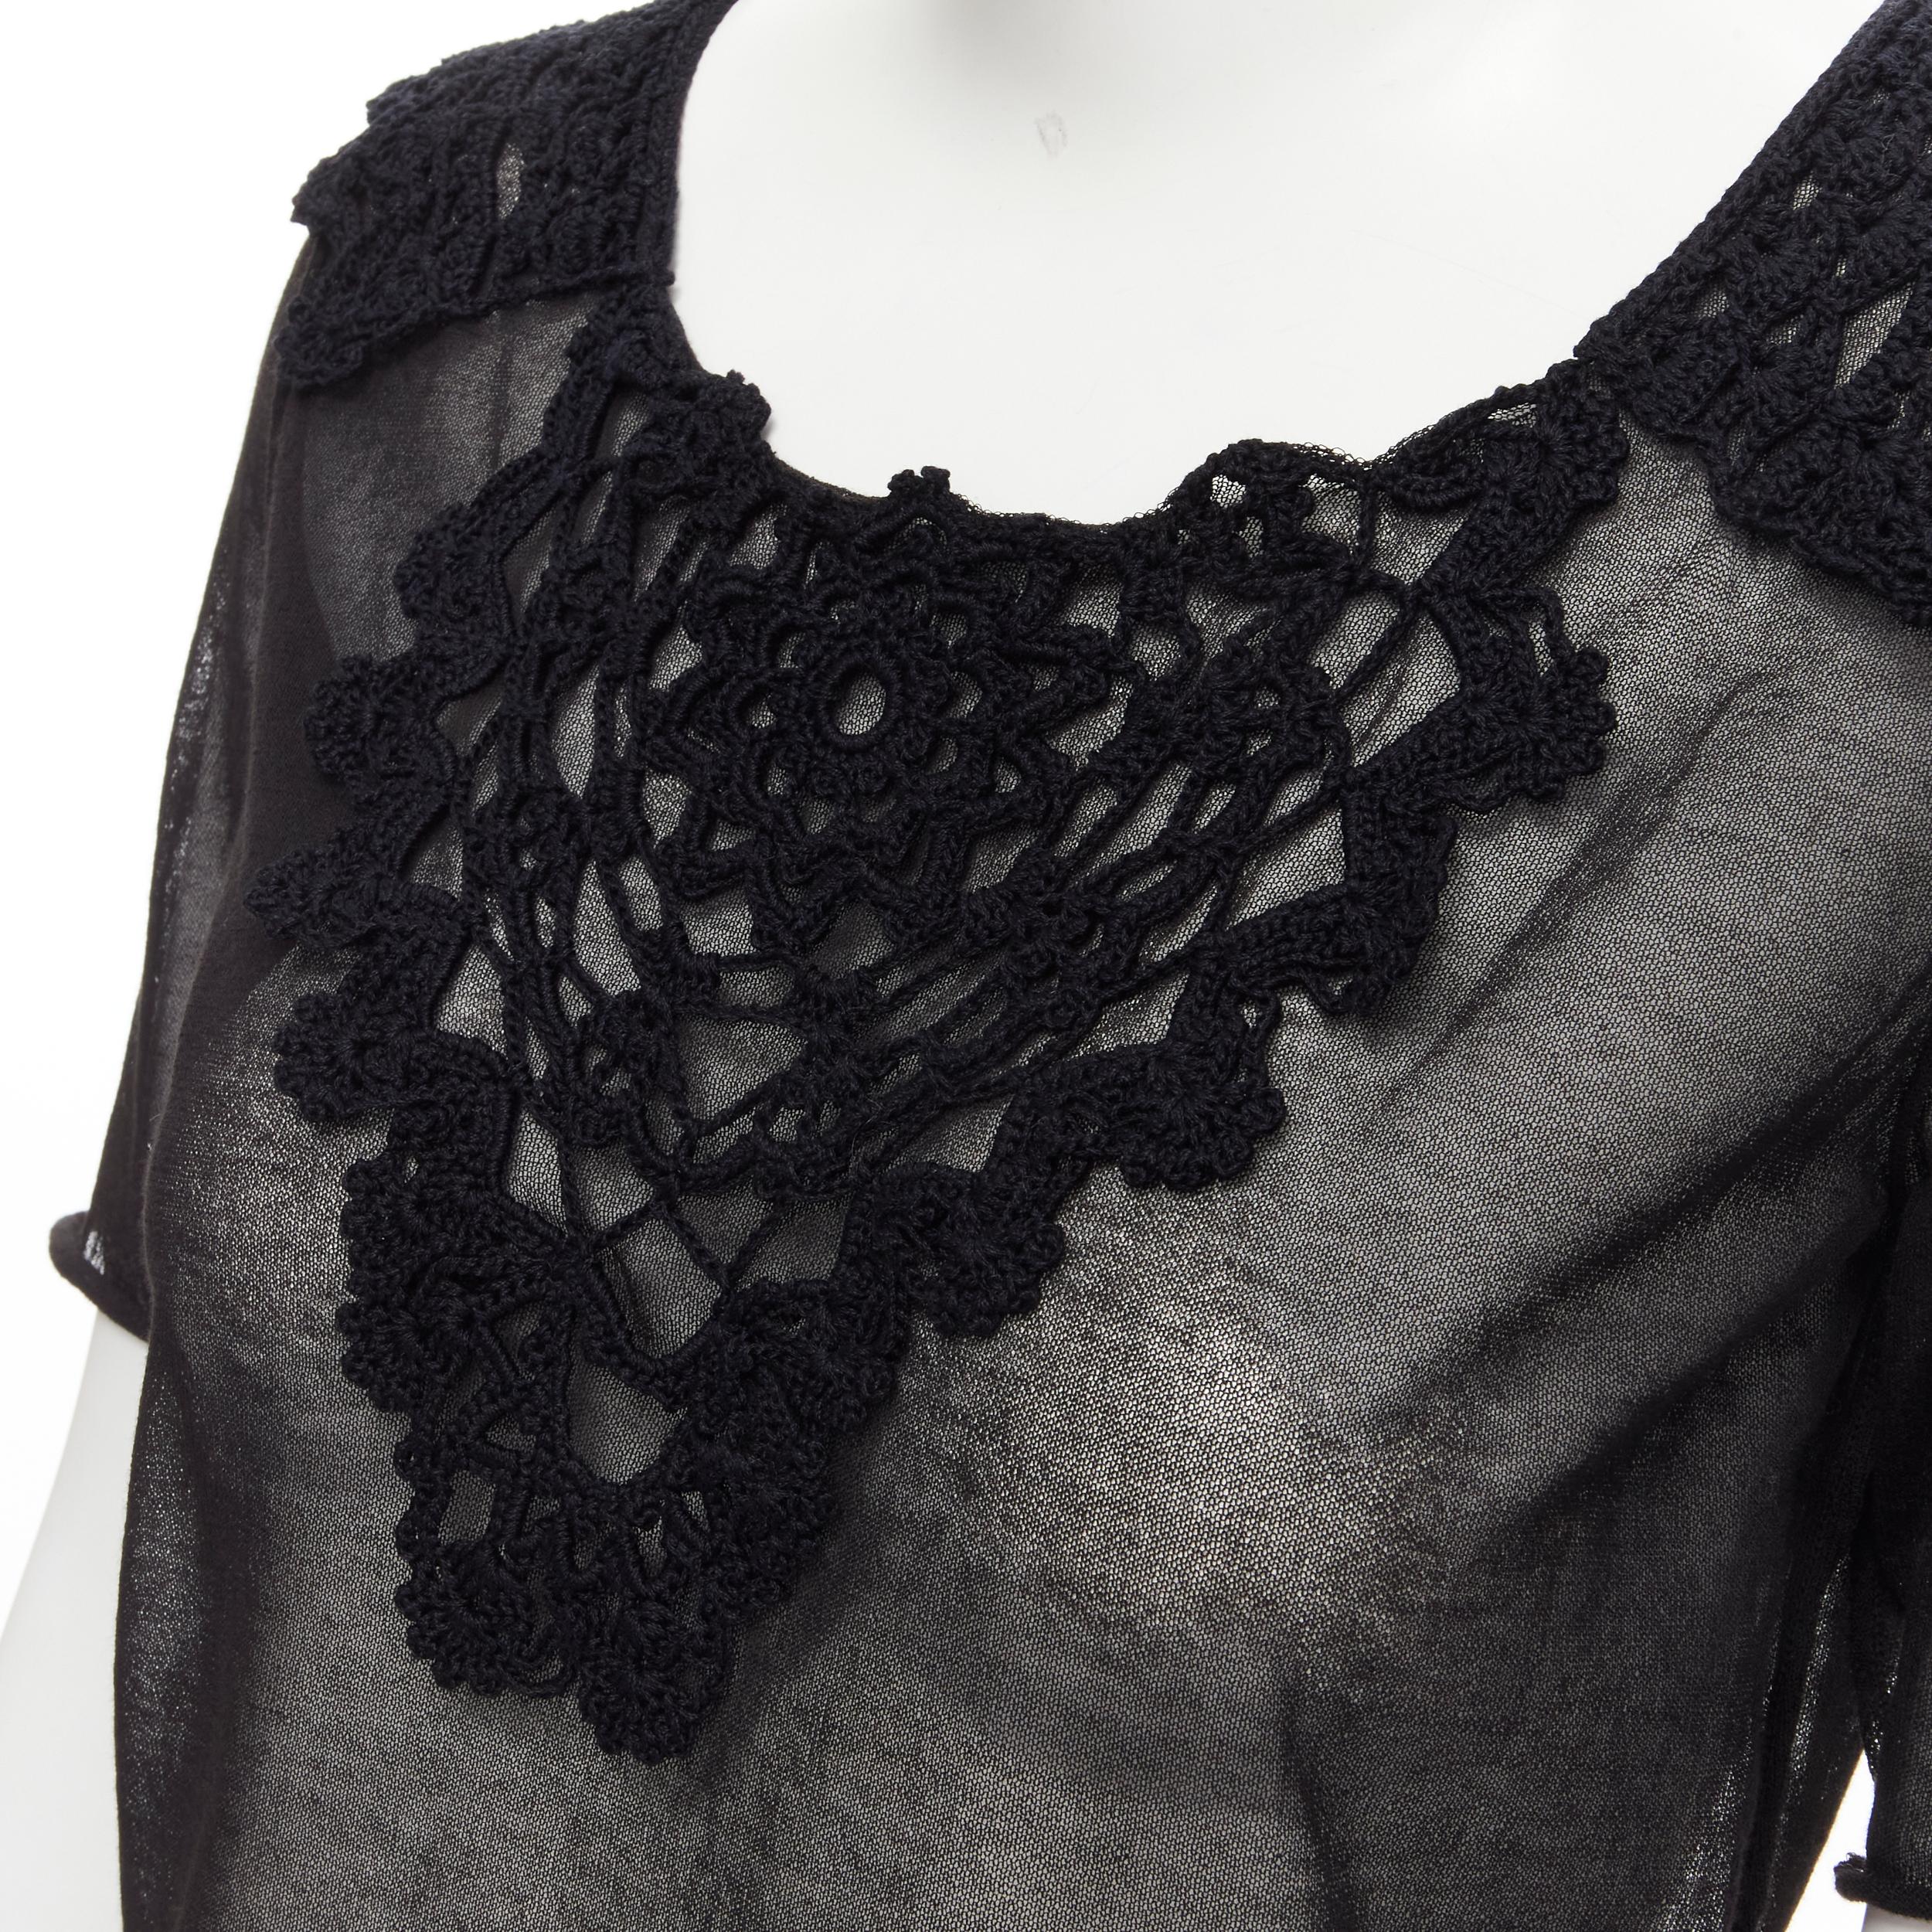 new DOLCE GABBANA crochet lace sheer rolled edges fine knit cotton top IT40 S 
Reference: MELK/A00041 
Brand: Dolce Gabbana 
Material: Cotton 
Color: Black 
Pattern: Solid 
Extra Detail: Crochet detailing at collar. Round neck. Rolled edges. 
Made